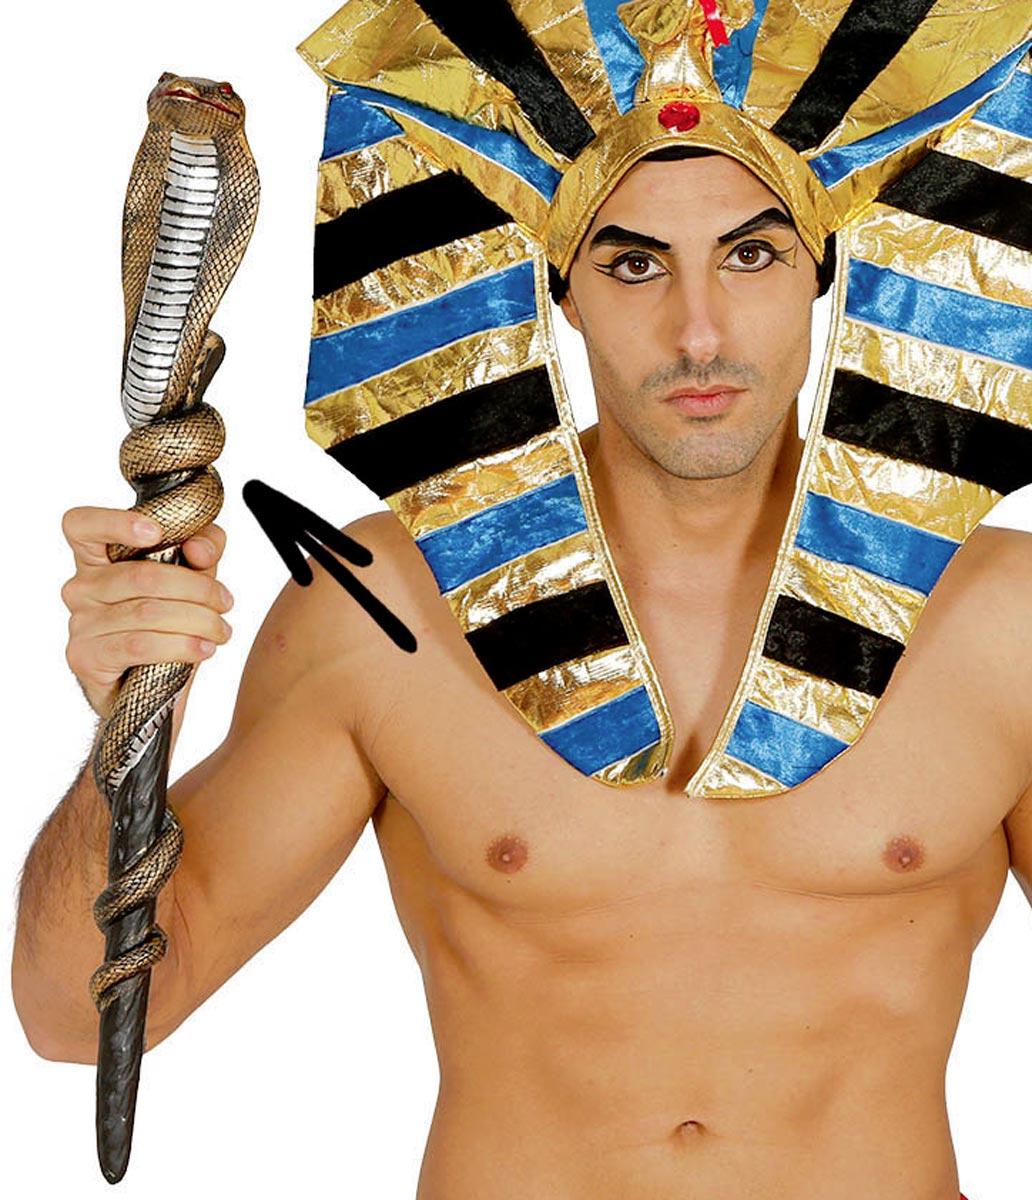 Pharaoh Cobra Cane Sceptre 63cm in length by Guirca 18339 available here at Karnival Costumes online party shop